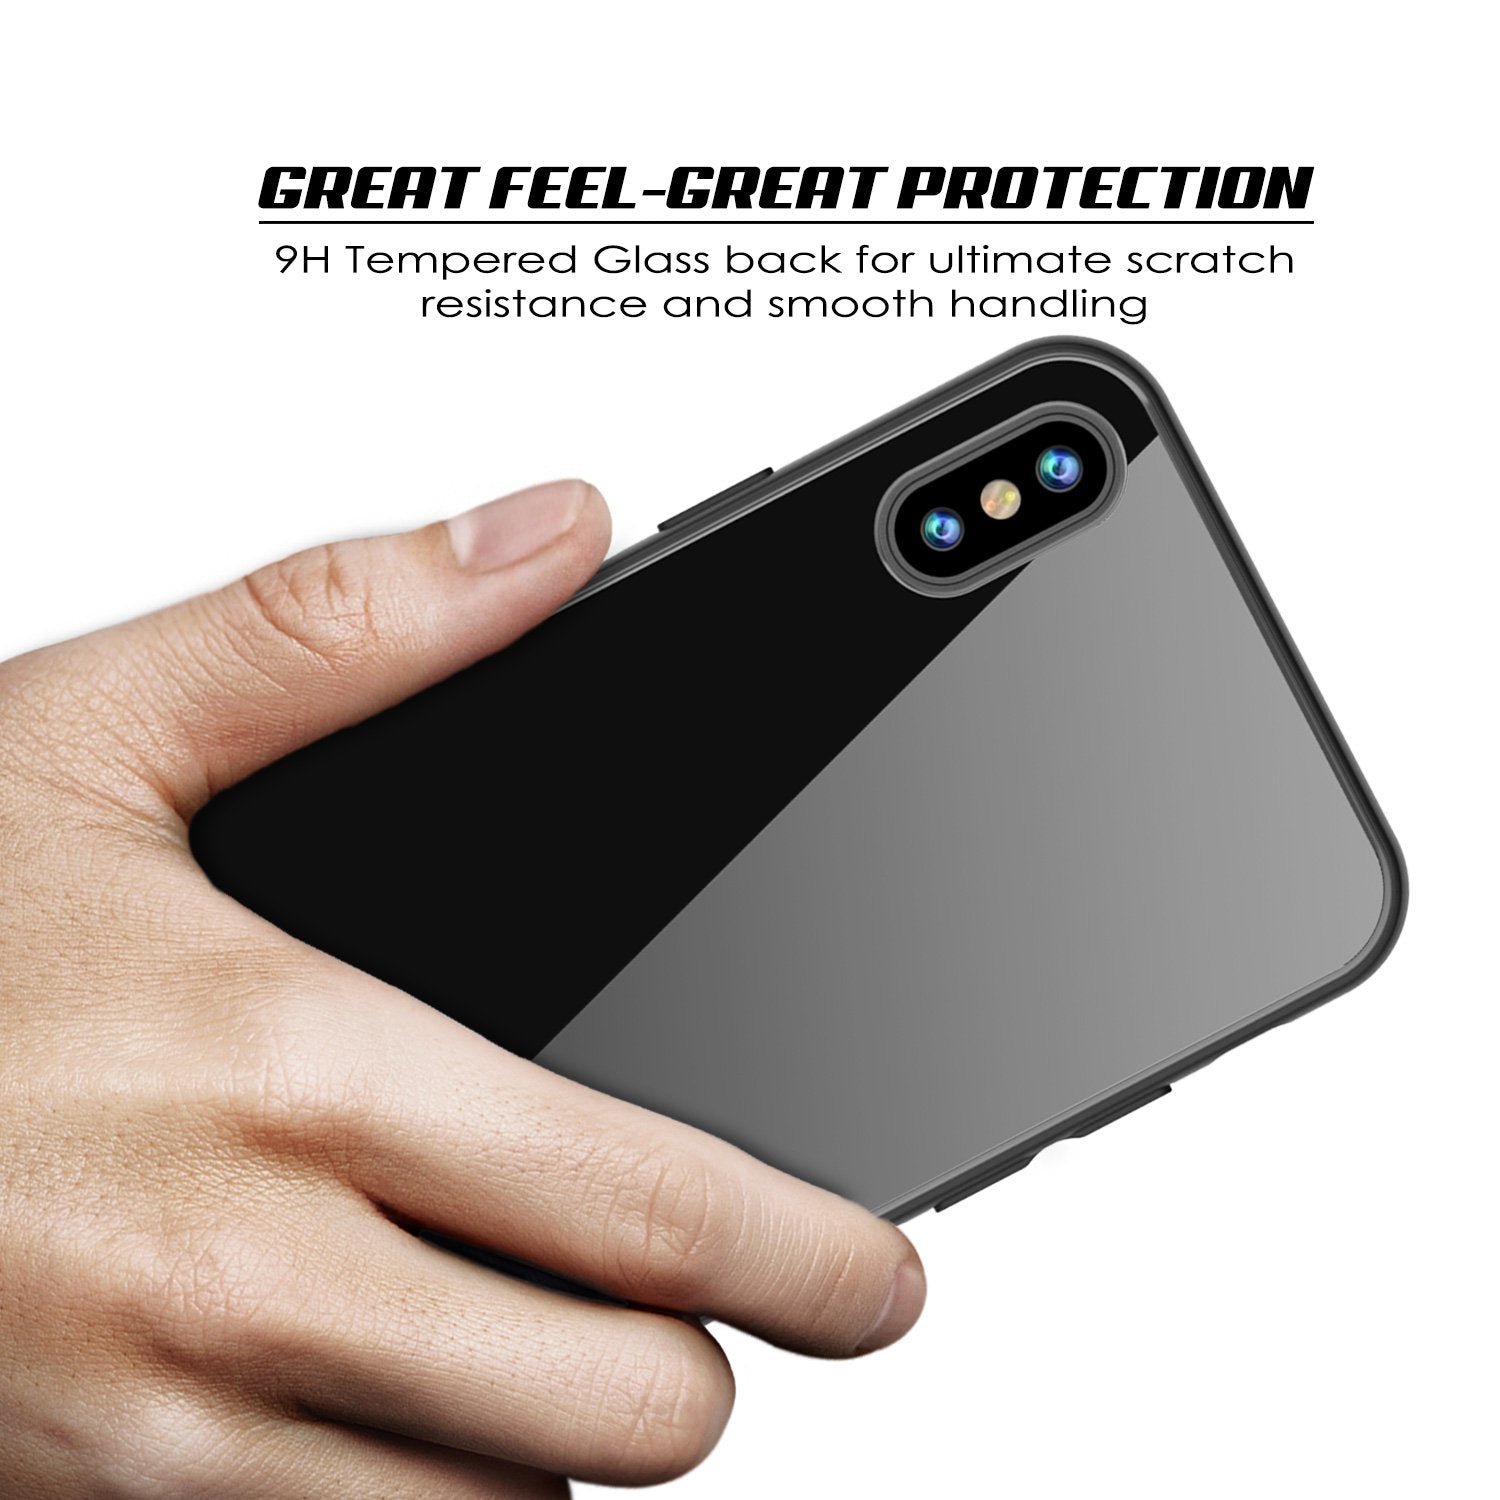 iPhone X Case, Punkcase GlassShield Ultra Thin Protectiv Cover, Black